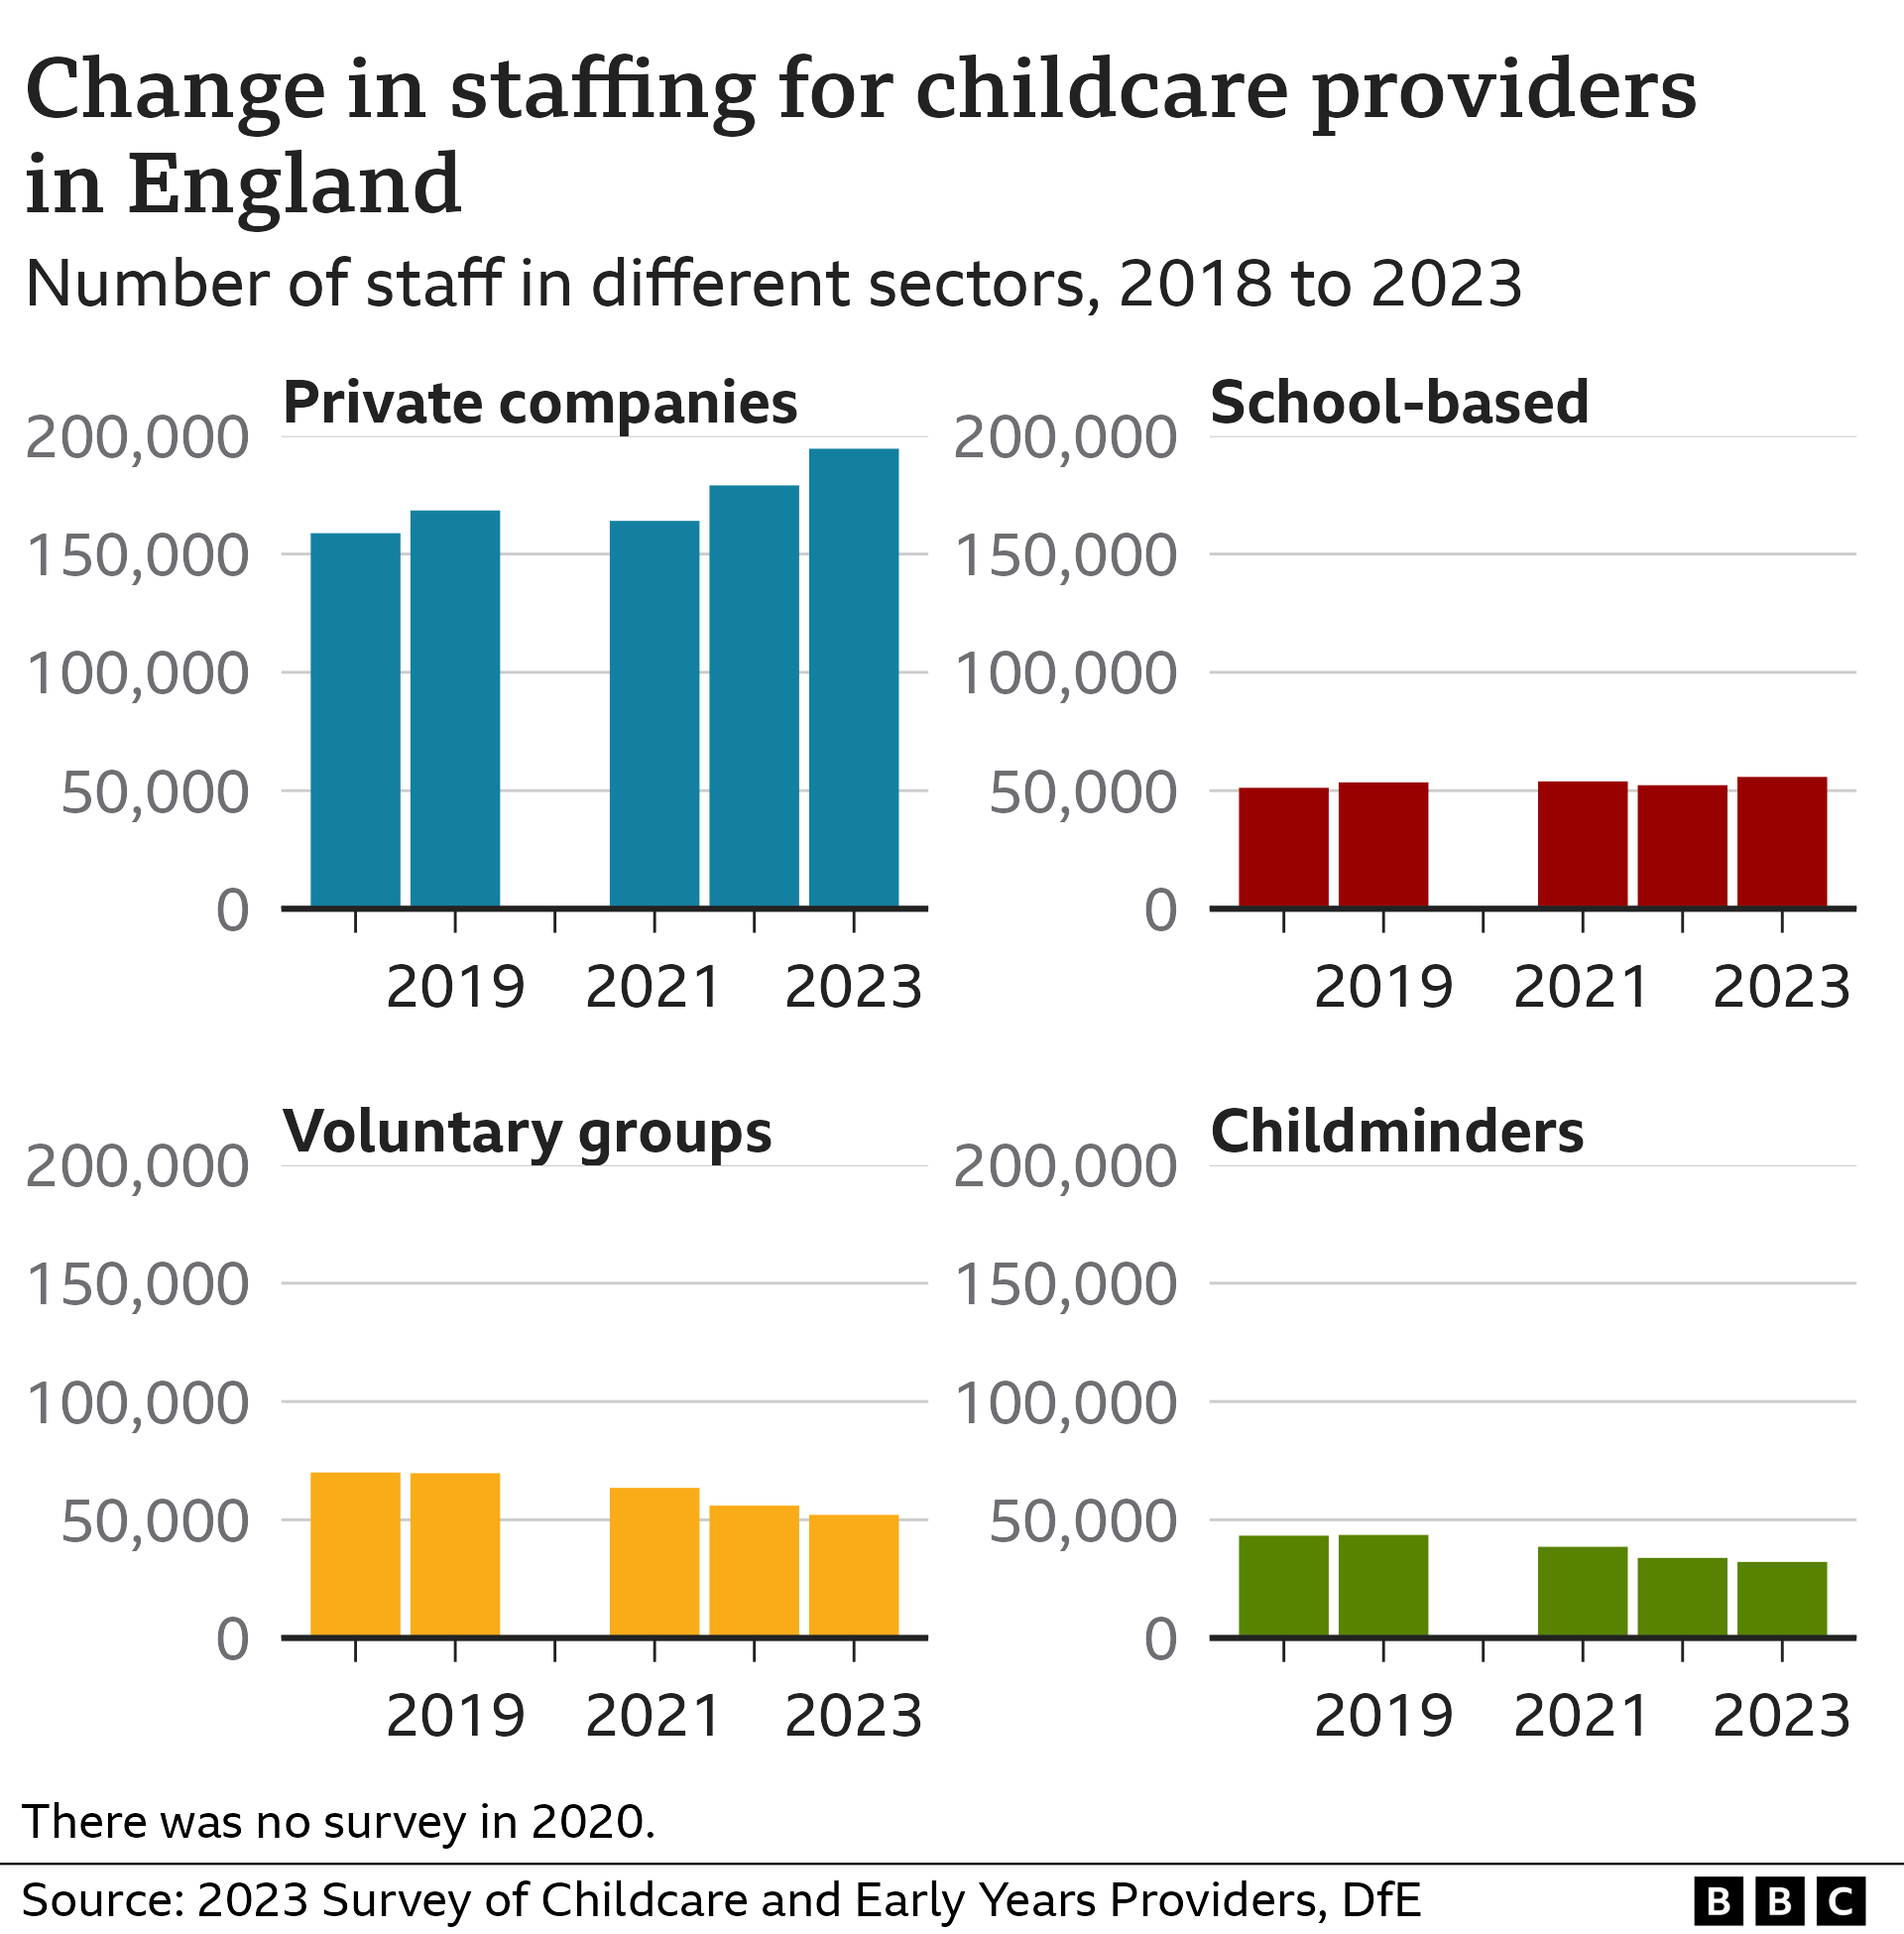 Four bar charts show the number of childcare staff in England in 2018, 2019, 2021, 2022 and 2023 by different provider types.